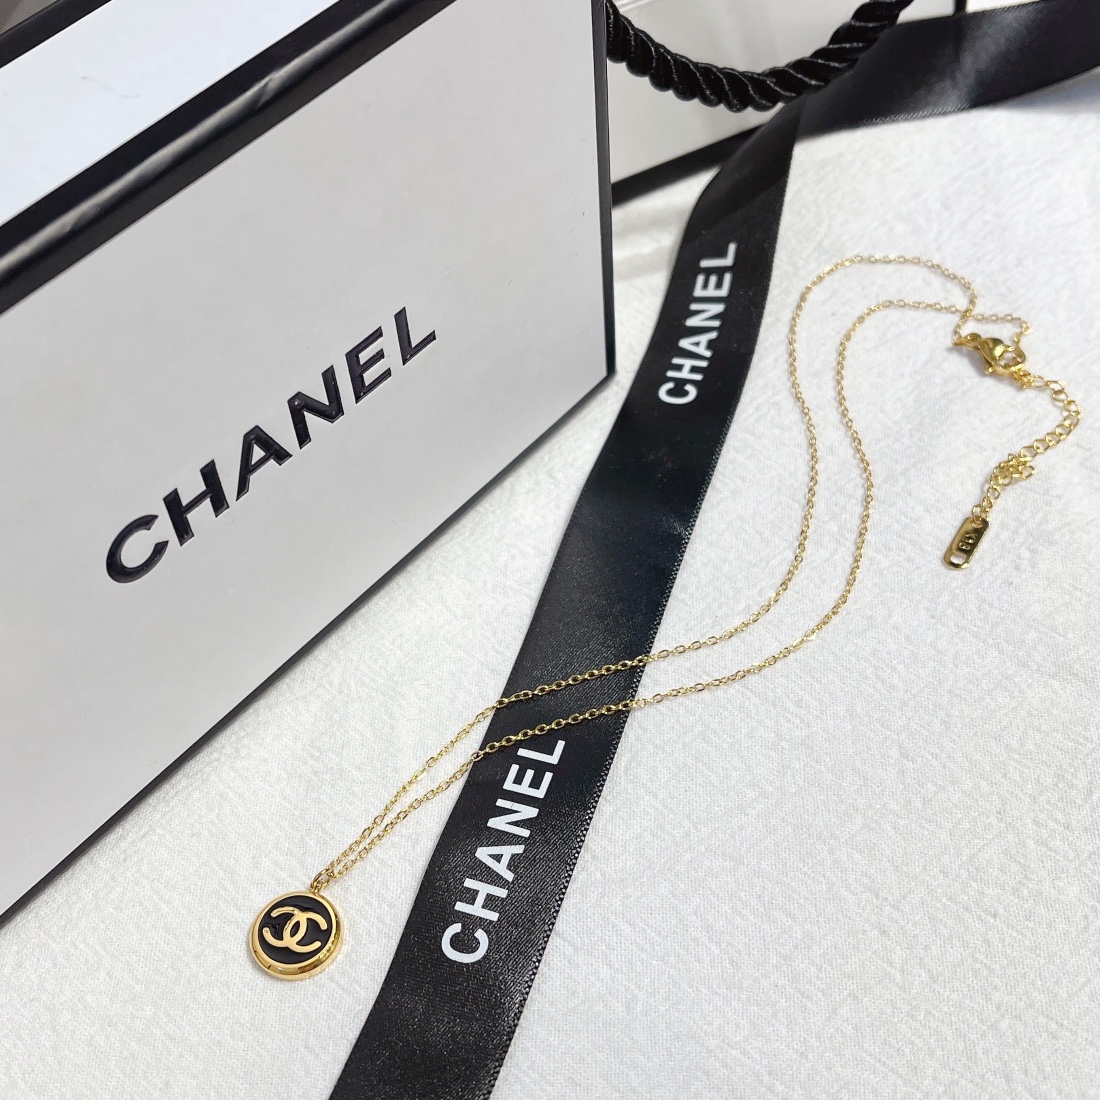 X433   Chanel necklace 108762